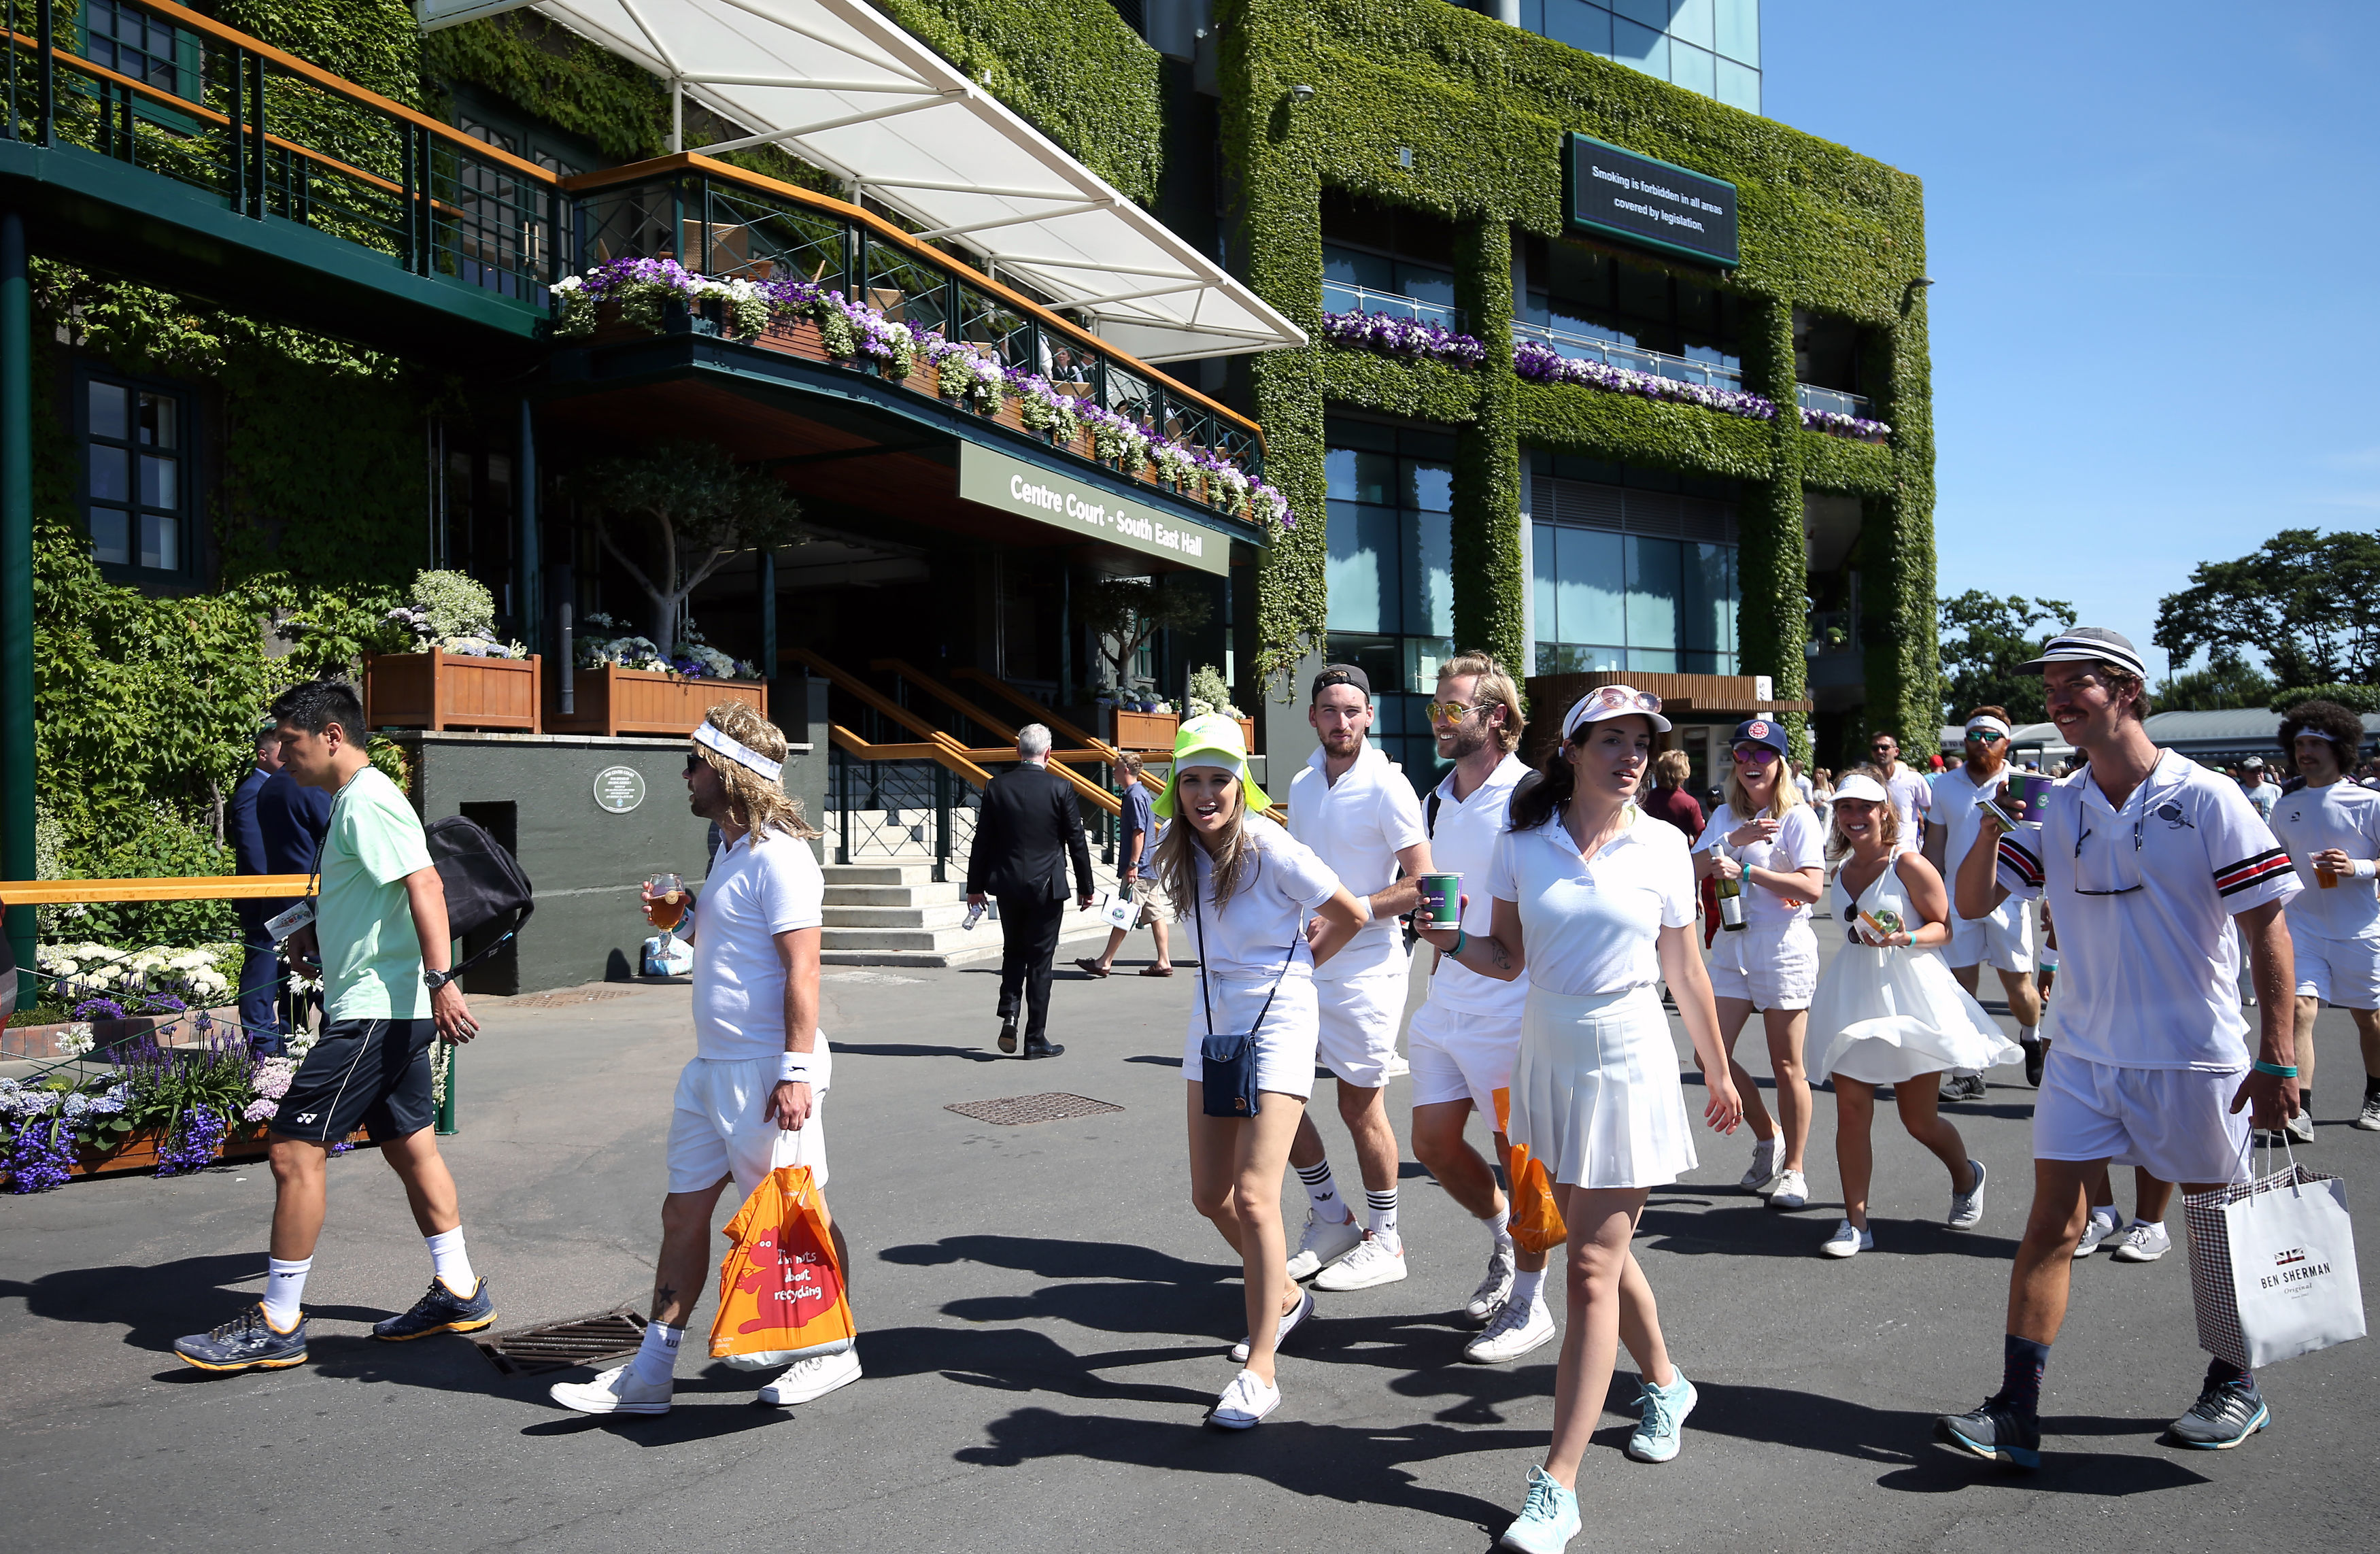 Spectators are led into the grounds on day one of the Wimbledon Championships at the All England Lawn Tennis and Croquet Club